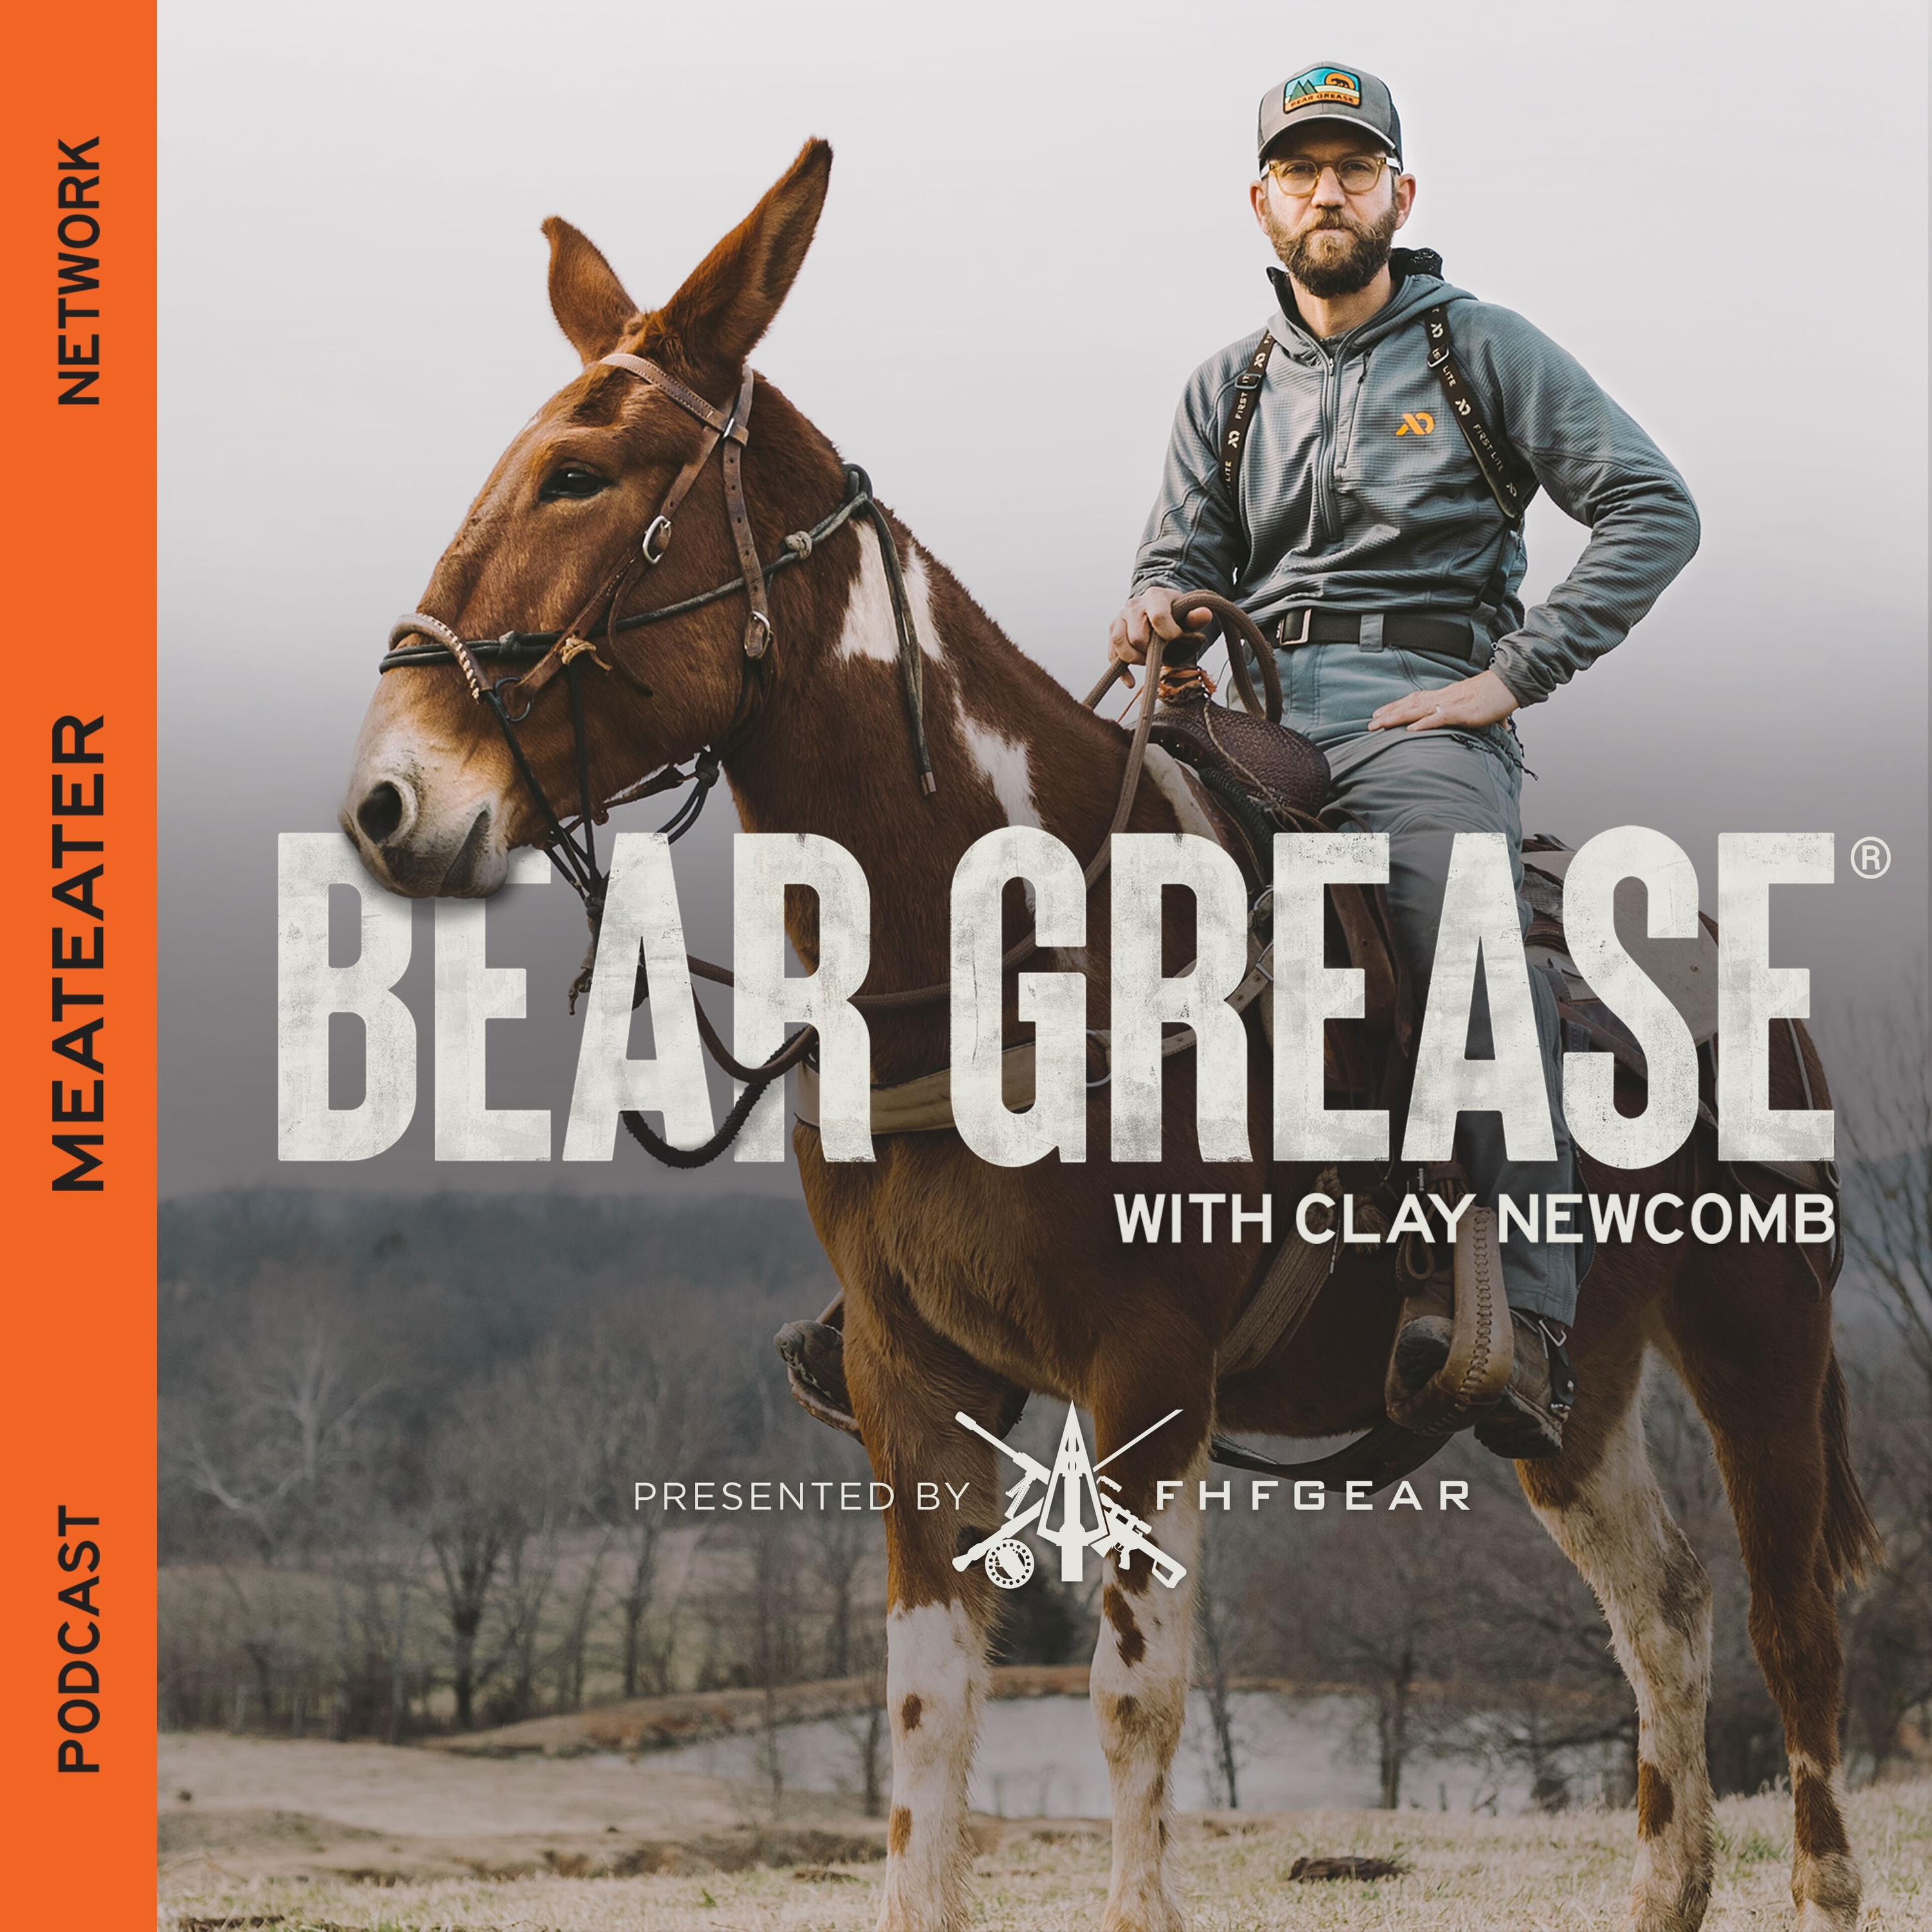 Ep. 212: BEAR GREASE [RENDER] - New Pup, Clays Unconventional Farrier Skills, and Mississippi Bears